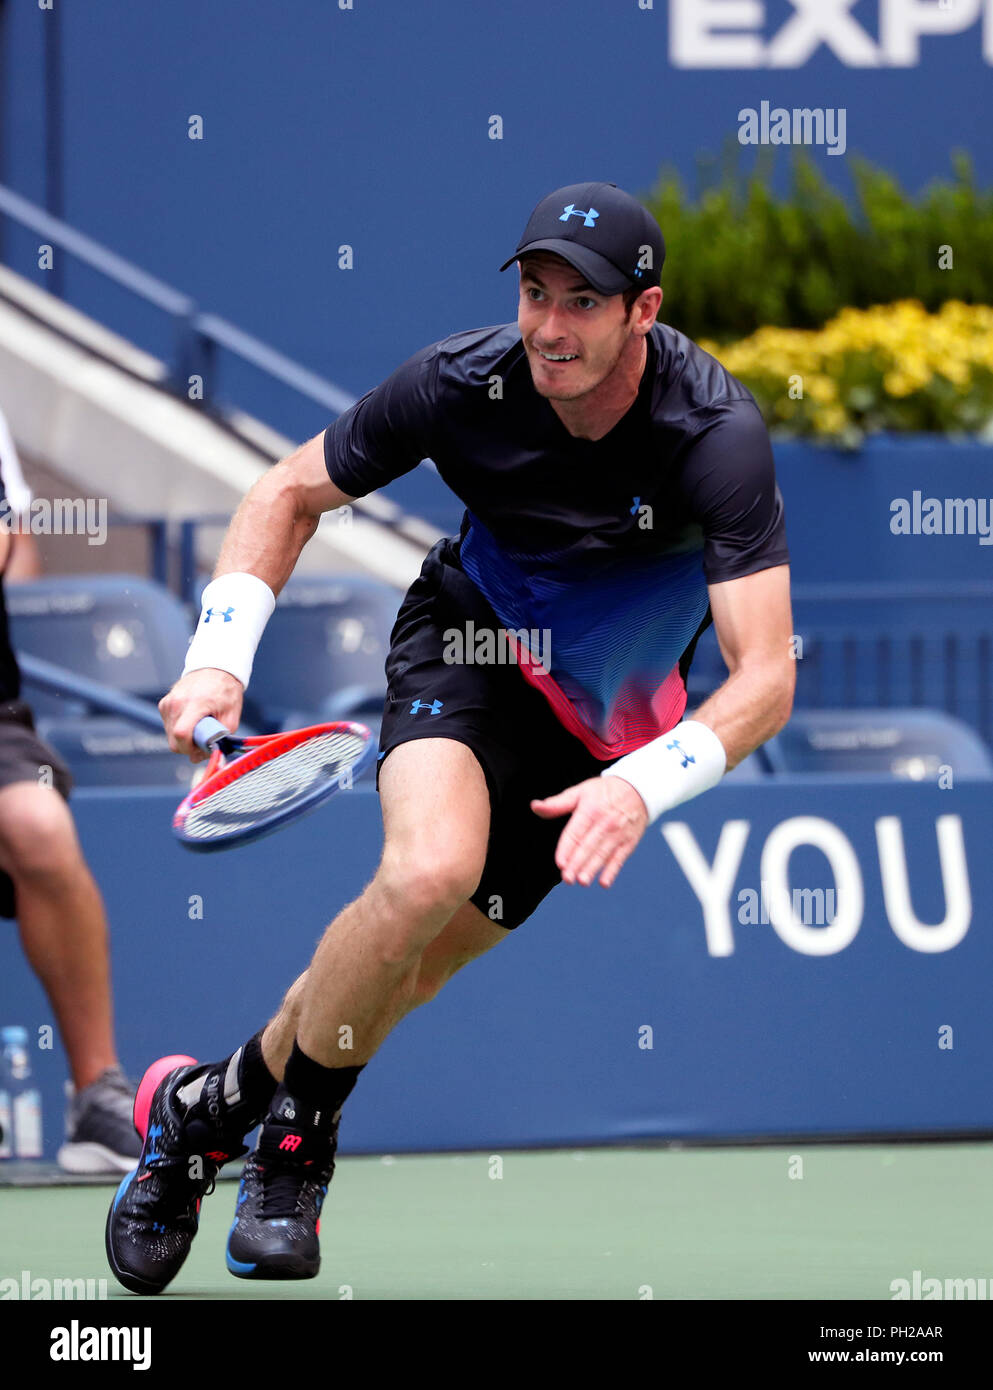 New York, United States. 29th Aug, 2018. Flushing Meadows, New York - August 29, 2018: US Open Tennis: Andy Murray of Great Britain during his second round match to Fernando Verdasco of Spain at the US Open in Flushing Meadows, New York. Verdasco won the match in four sets. Credit: Adam Stoltman/Alamy Live News Stock Photo